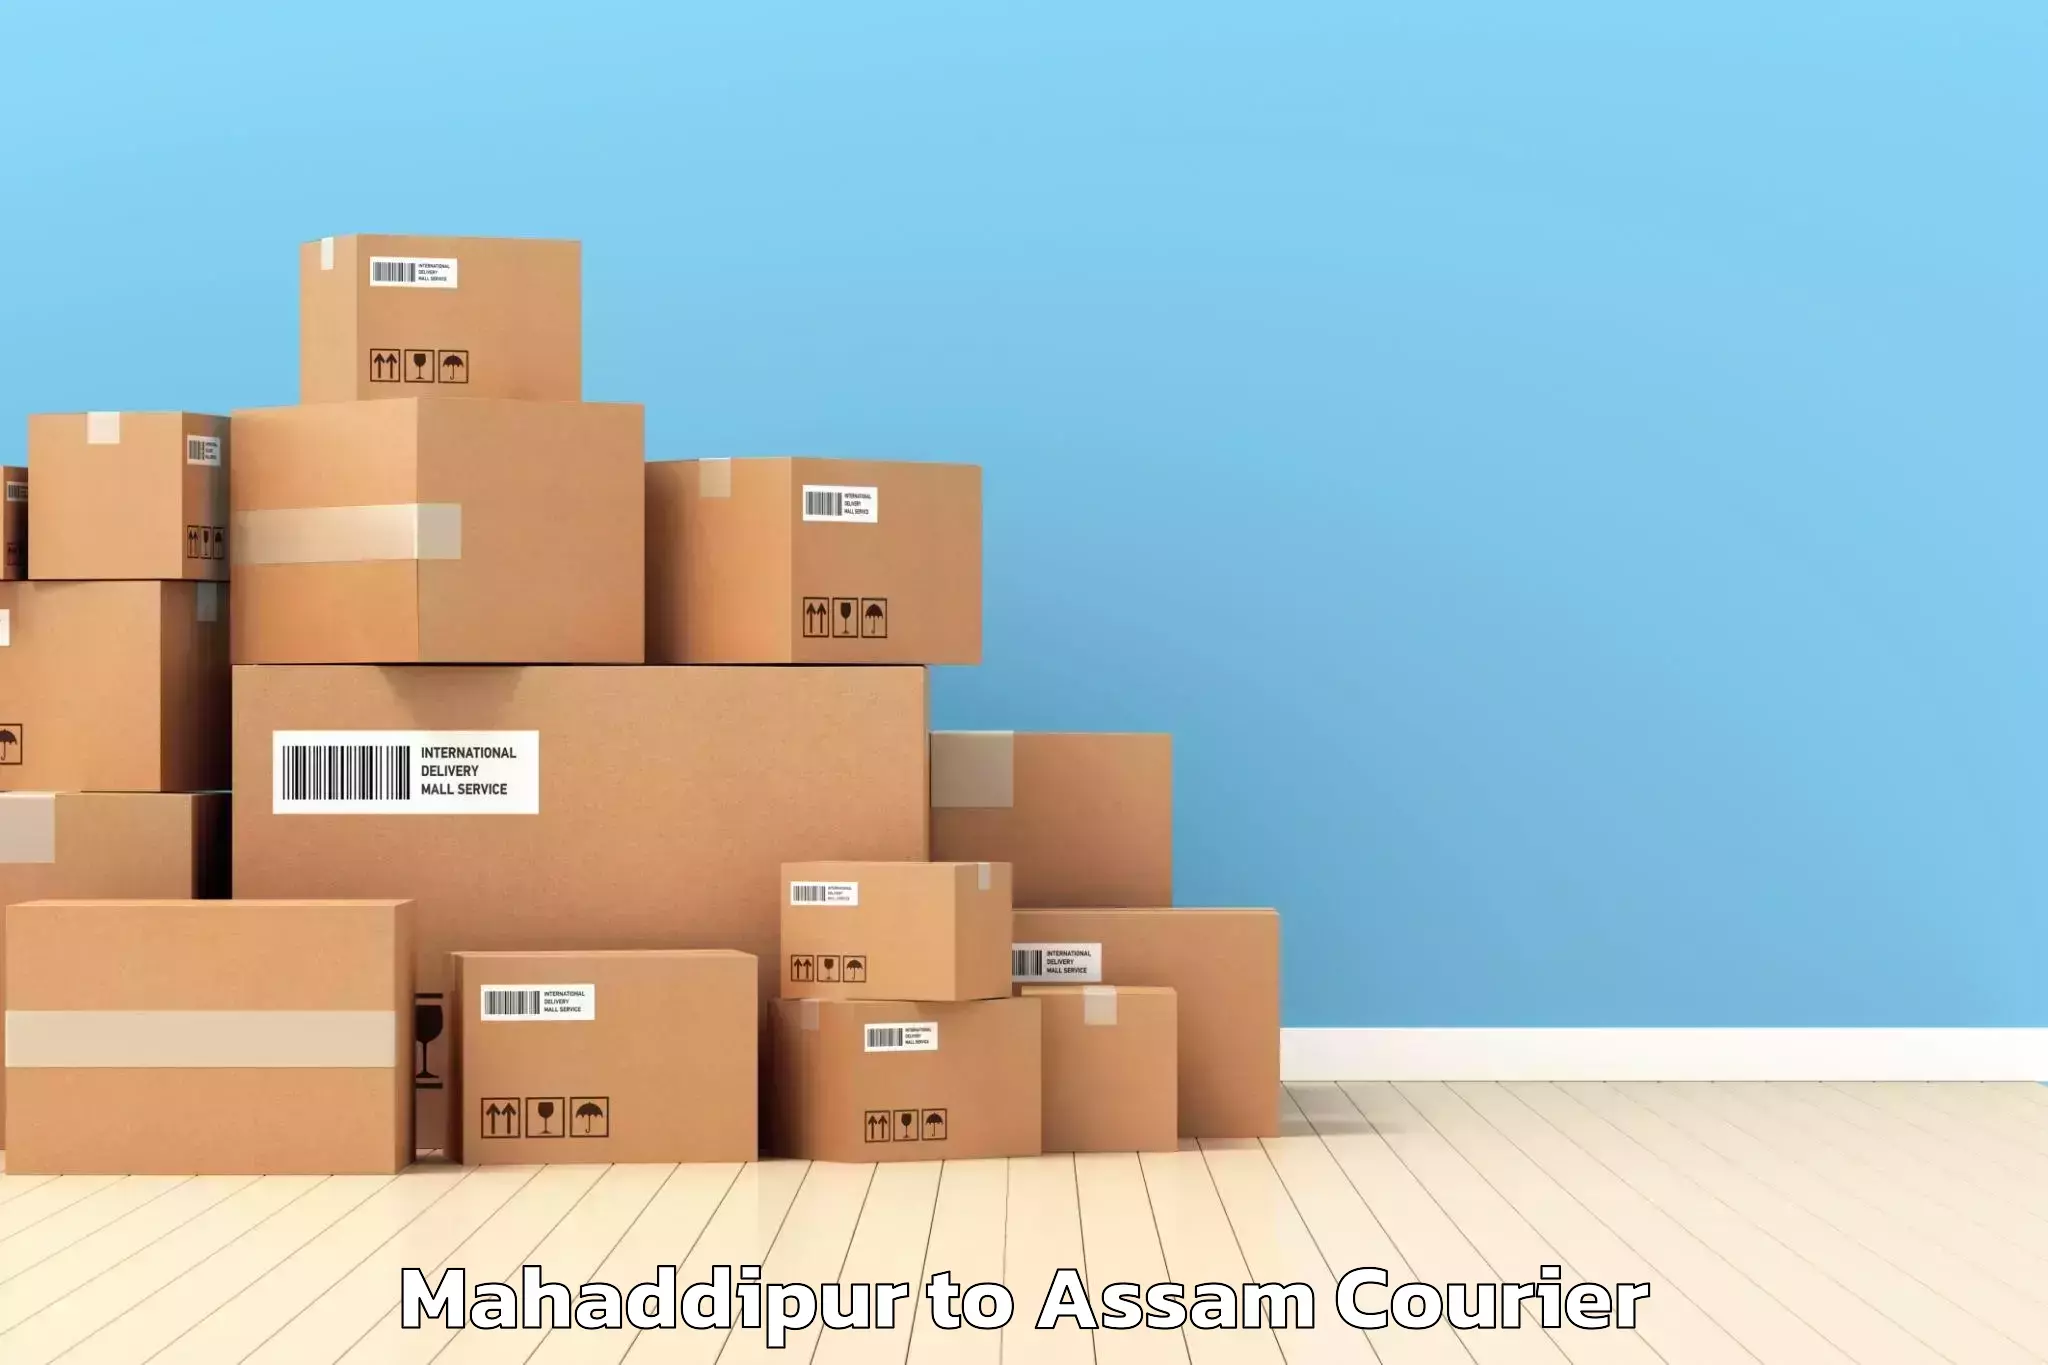 Furniture delivery service Mahaddipur to Assam